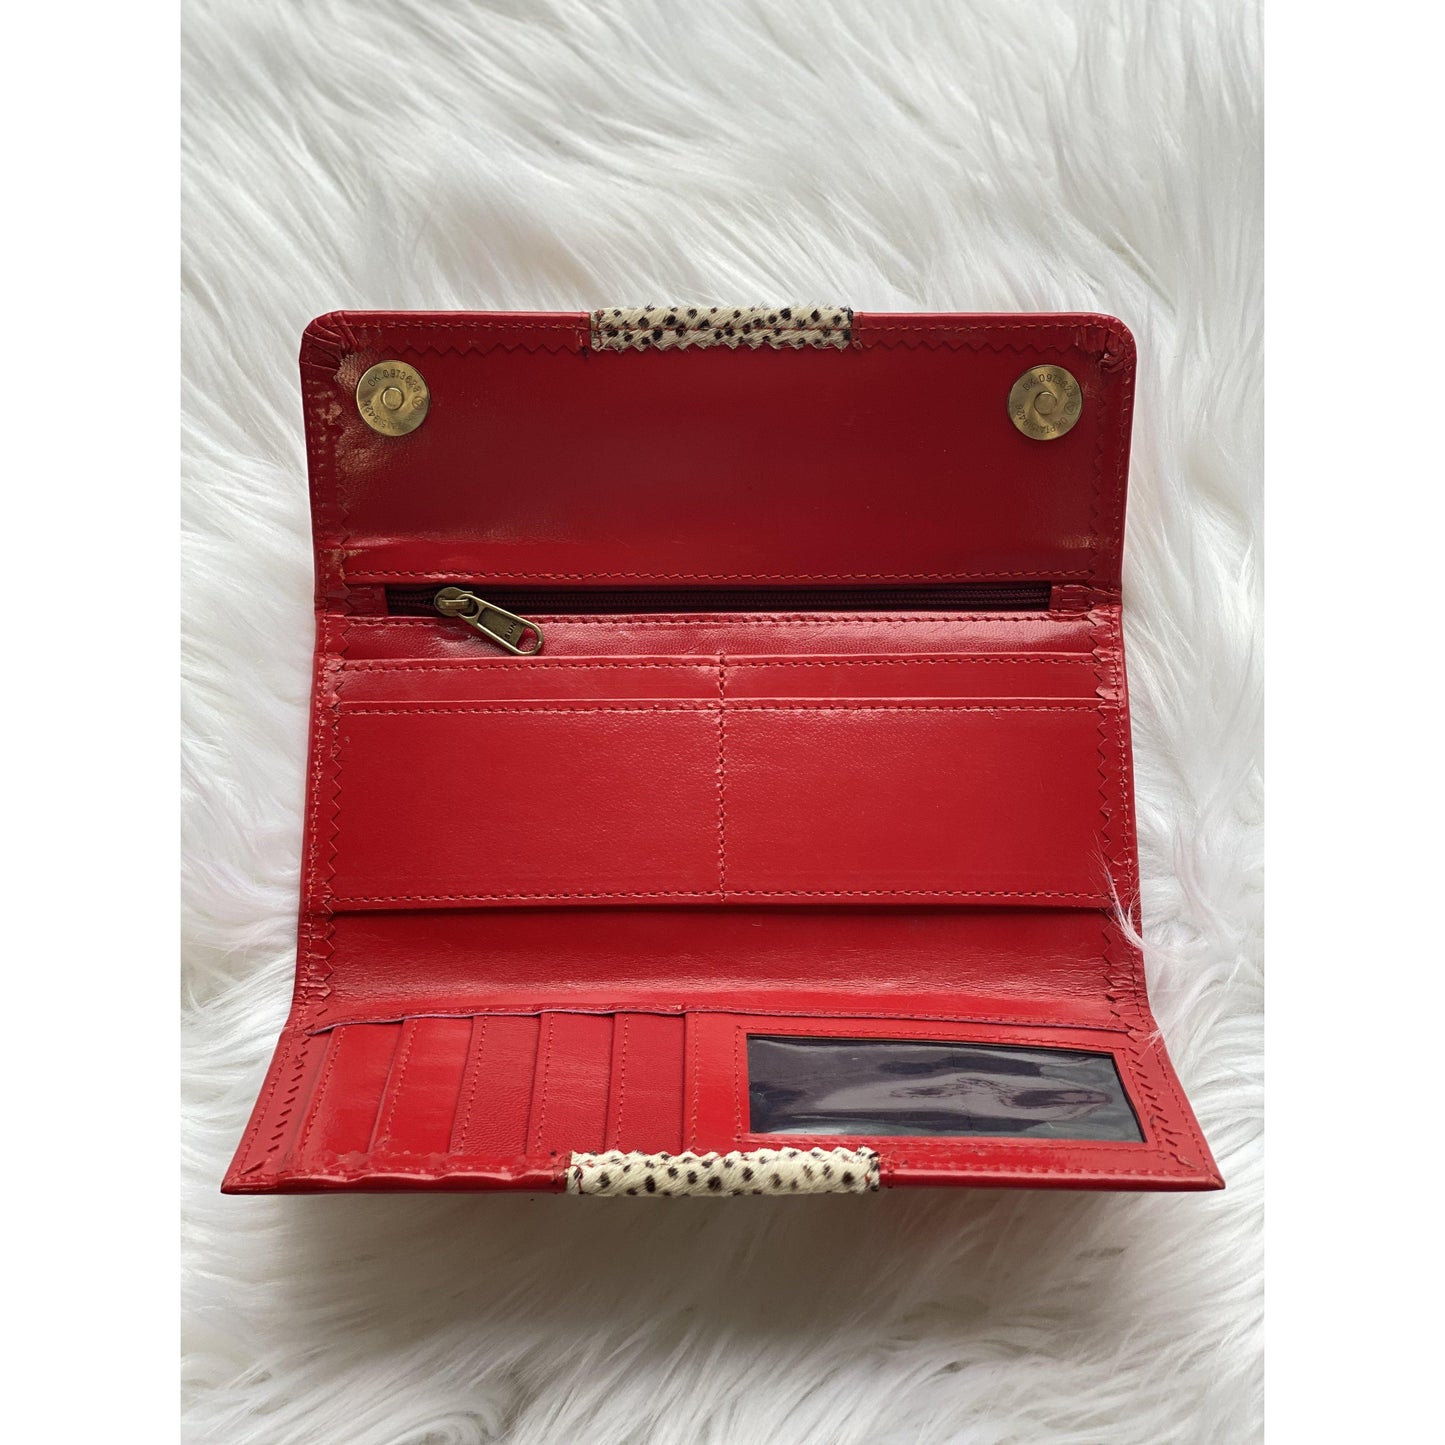 Bria Leather Wallet Bright Red Cheetah